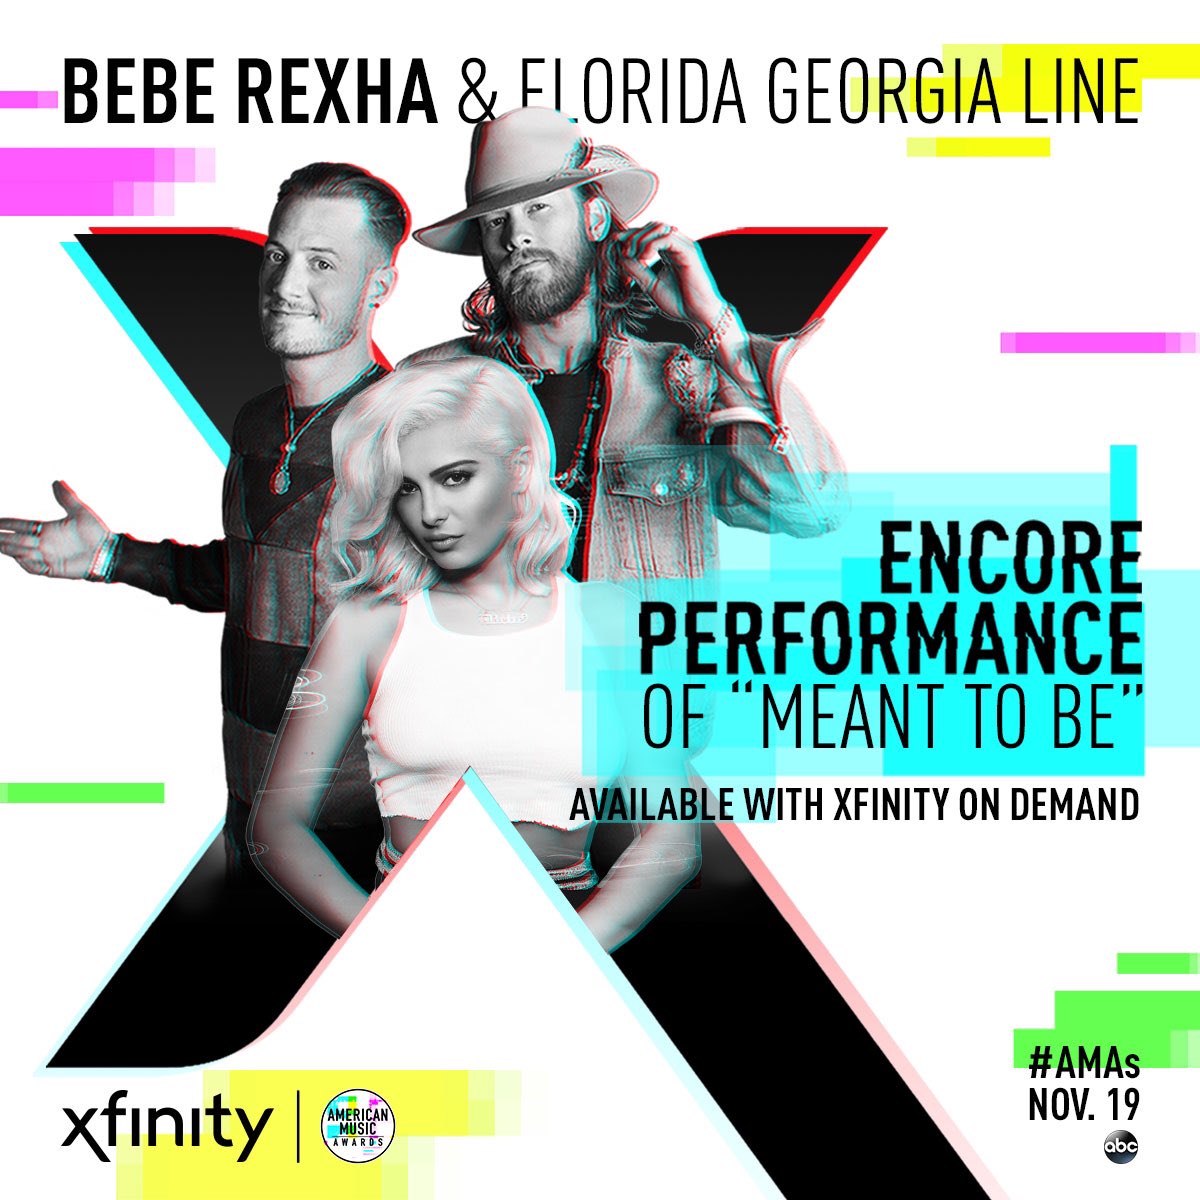 We'll be doing an Encore Performance of "Meant to Be" with @BebeRexha too 💥🎉 #AMAs https://t.co/Vf3p92o85a